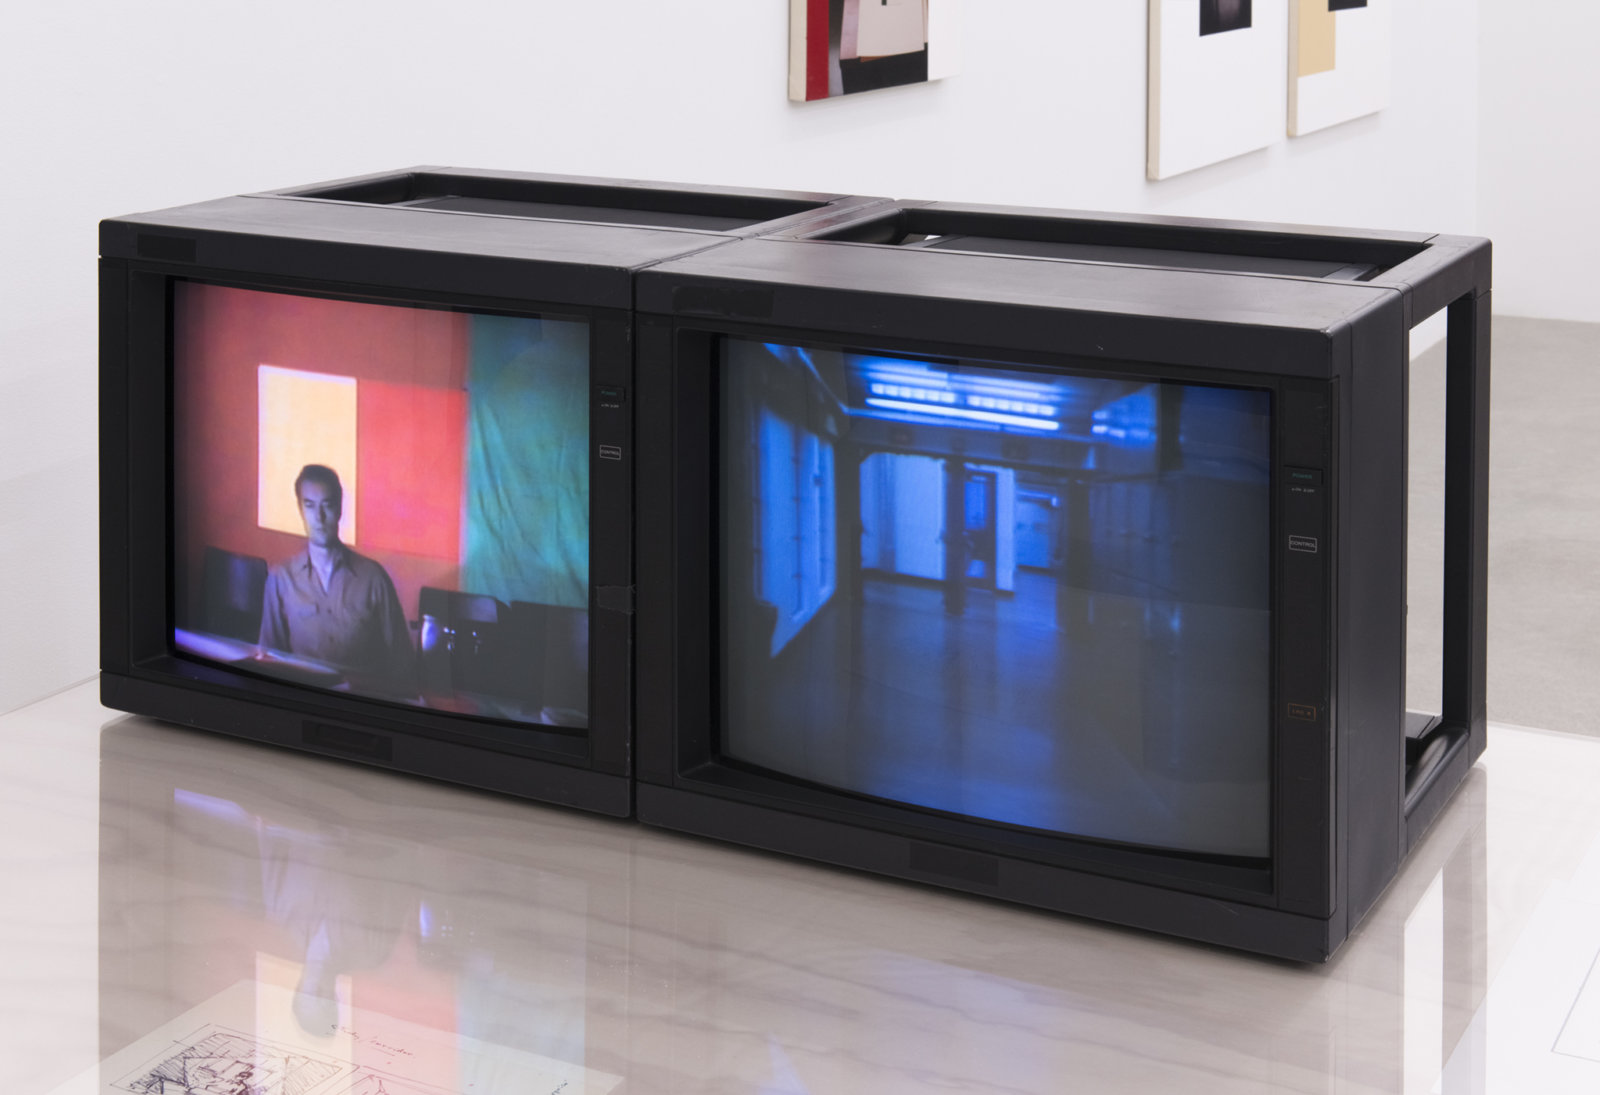 Ian Wallace, Study Corridor, 1983, 2 channel video, 3/4 inch video transferred to DVD